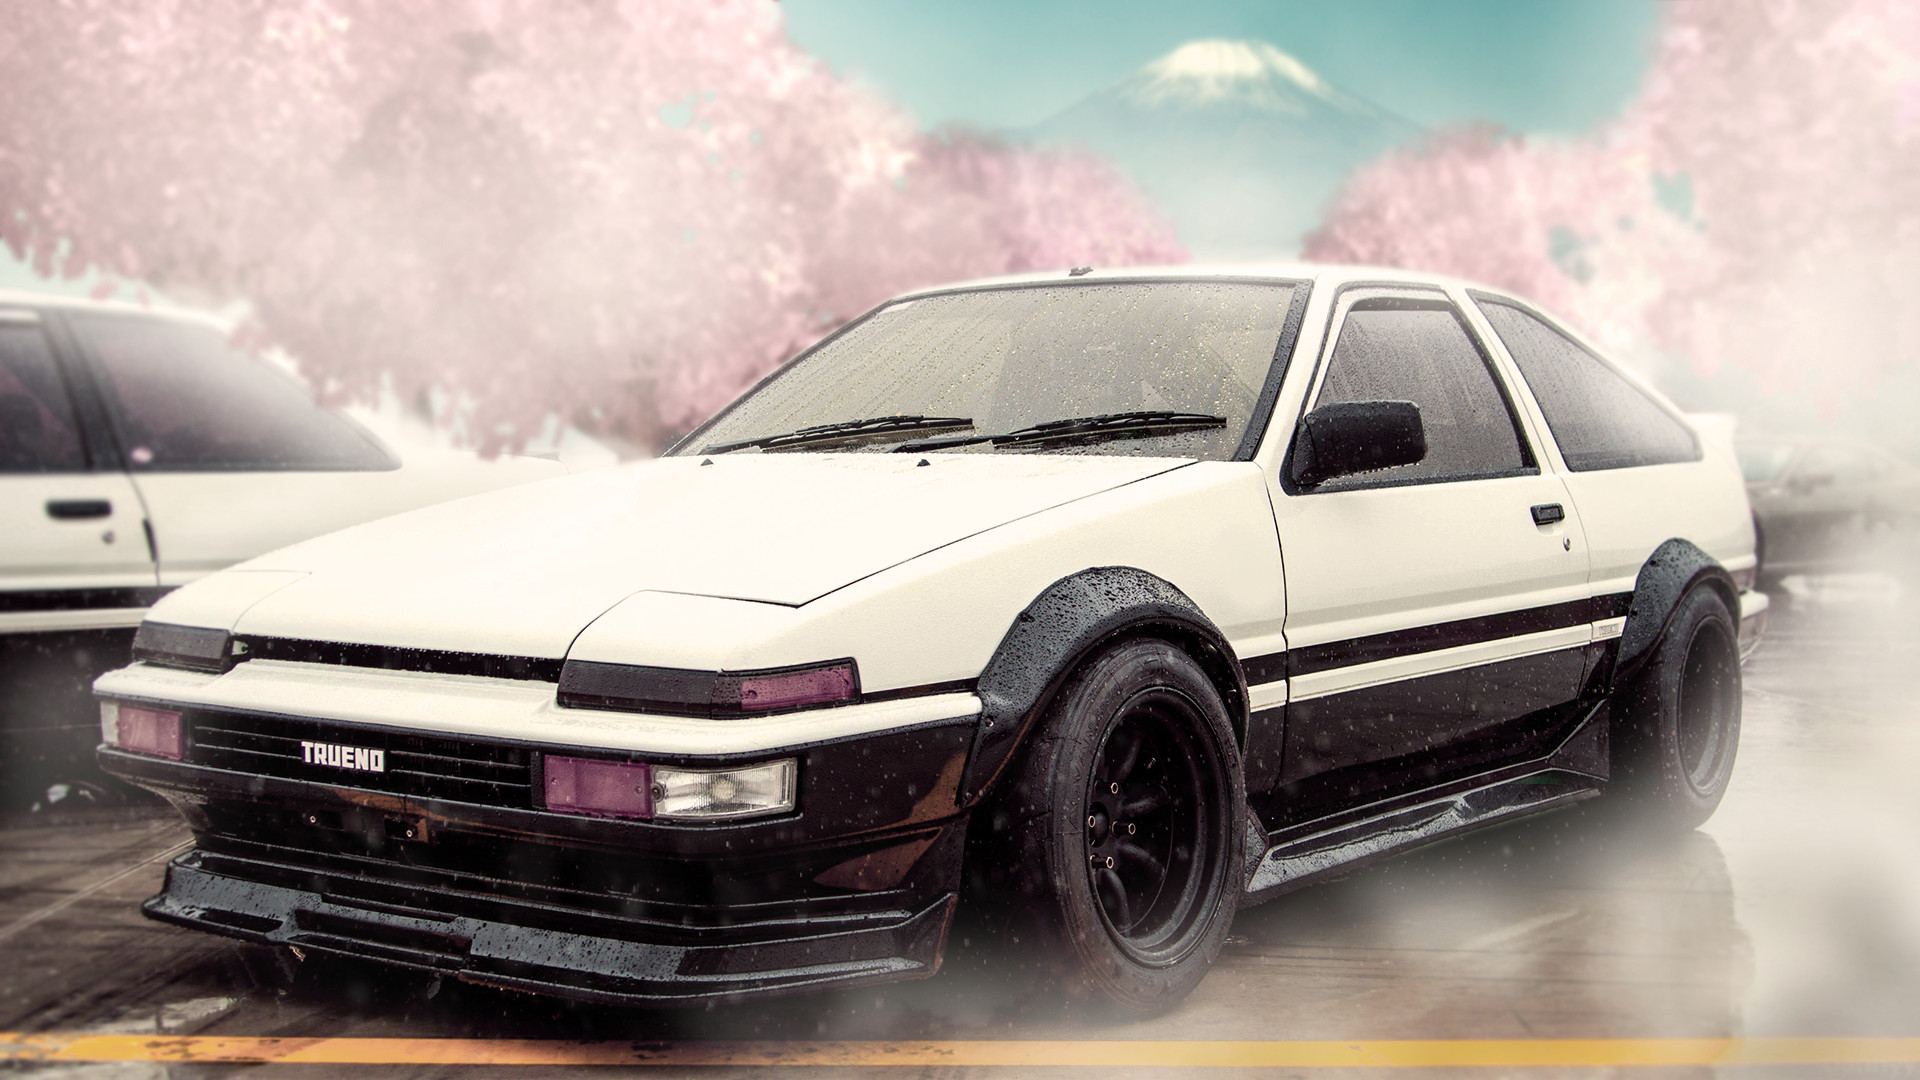 1920x1080 AE86 wallpaper i made for my computer, not very good but it was my first  attempt at photoshop.